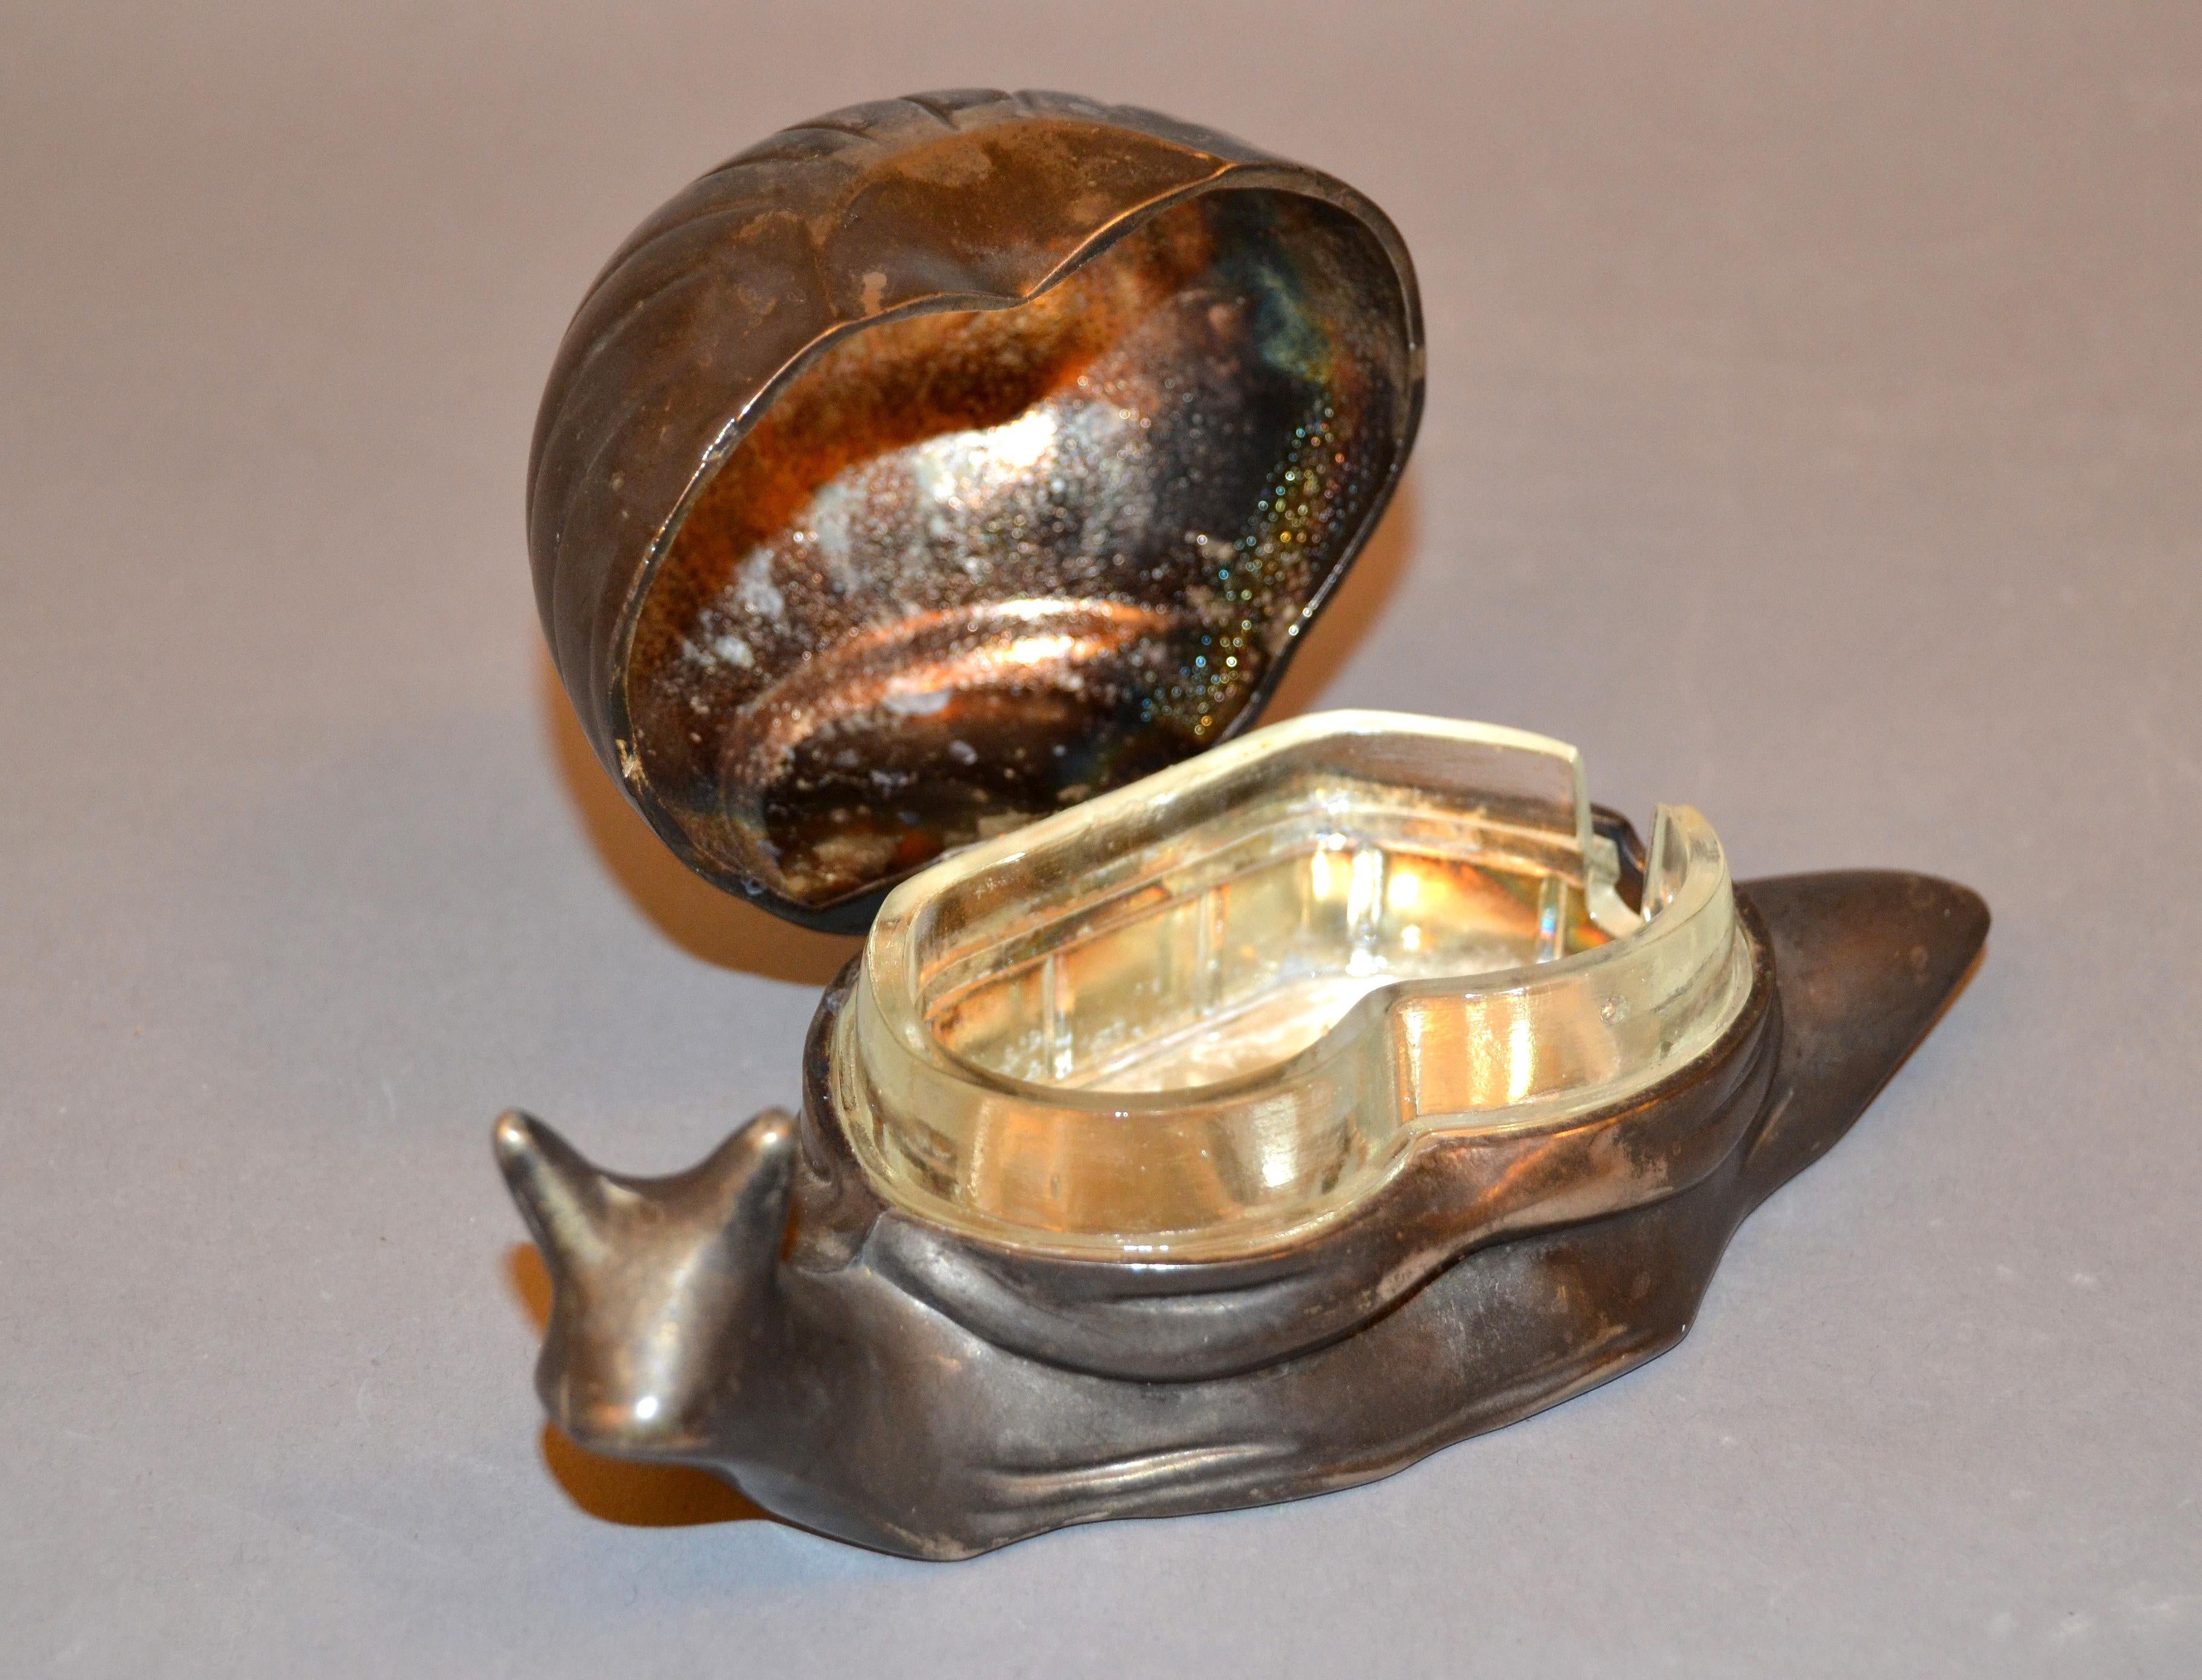 A vintage salt or spice dish designed as a snail with a glass tray inside.
Label silver plated on the bottom. 
Makes the perfect timeless gift!